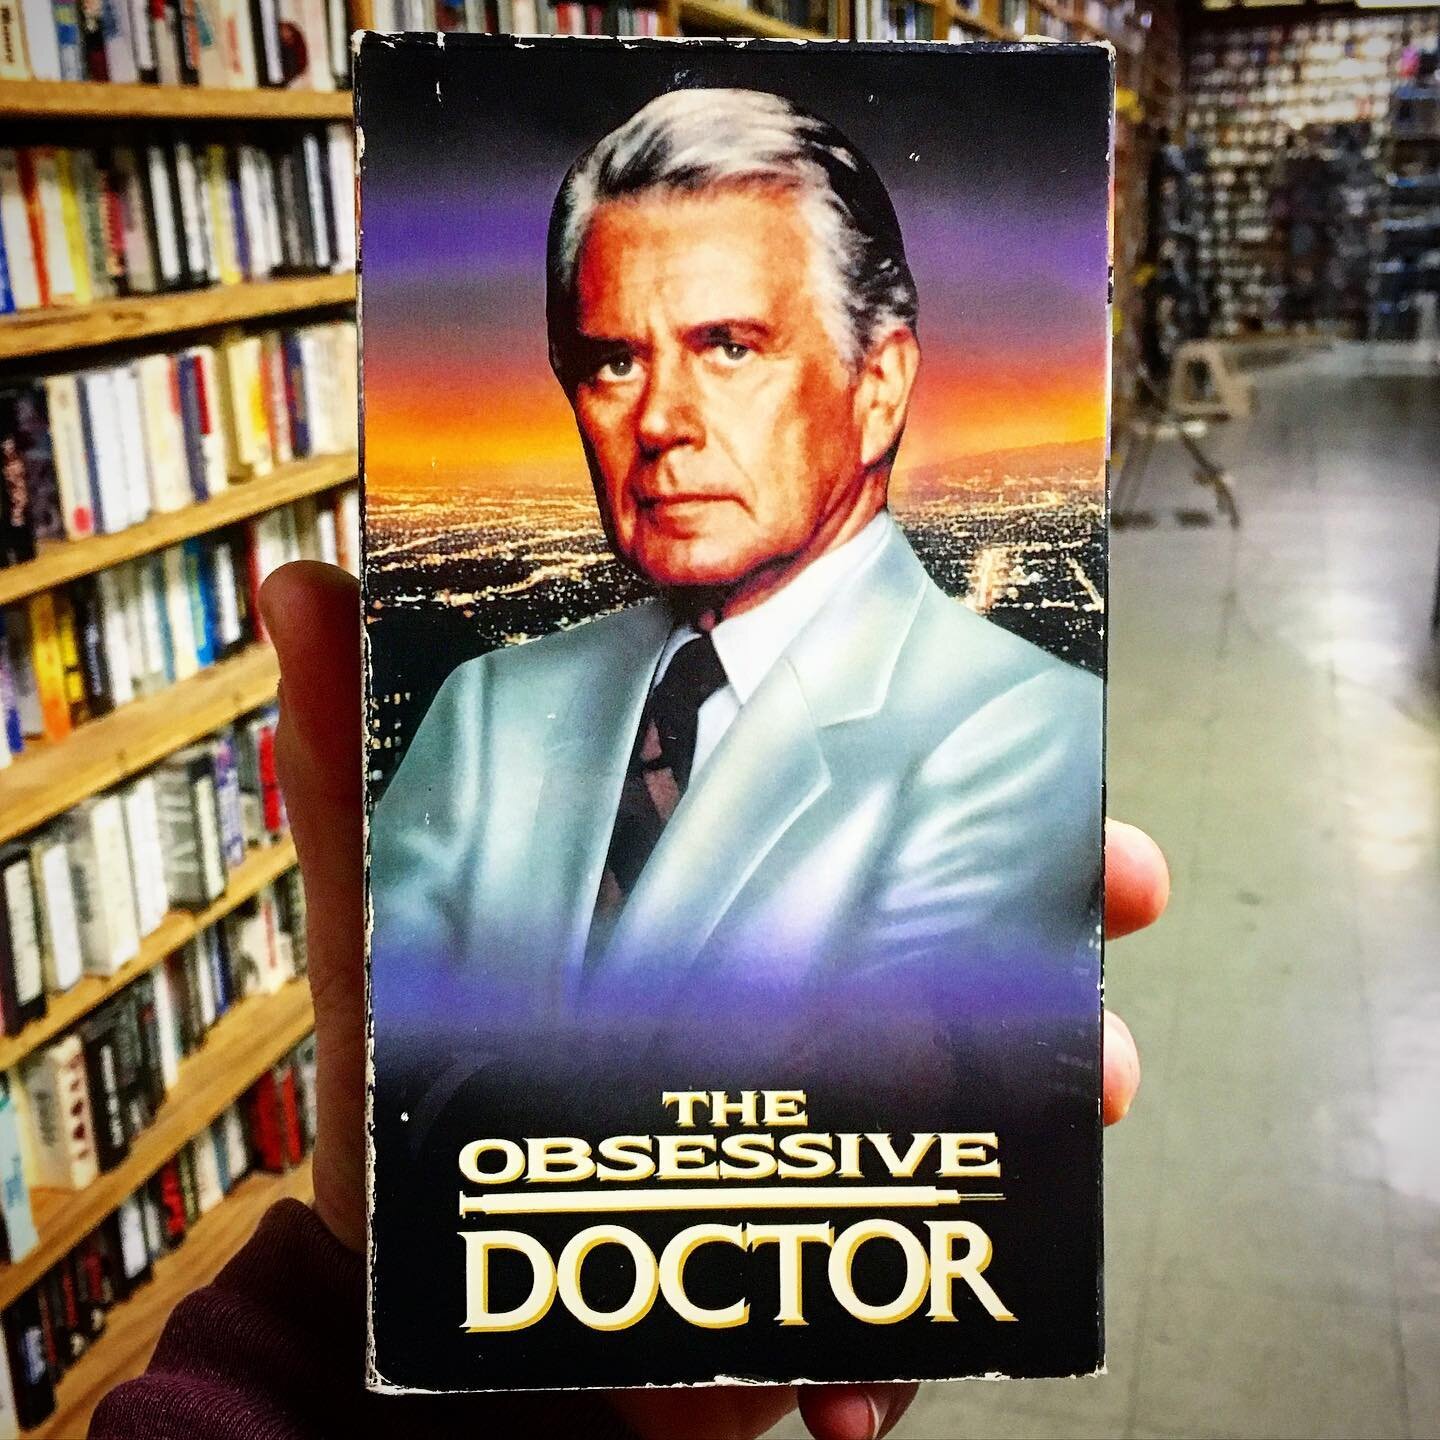 The Obsessive Doctor a.k.a. &ldquo;Murder Once Removed&rdquo; (1971) 📼📺 #TV #Movie #Mystery #Drama #Thriller #VHS #70s #Doctor